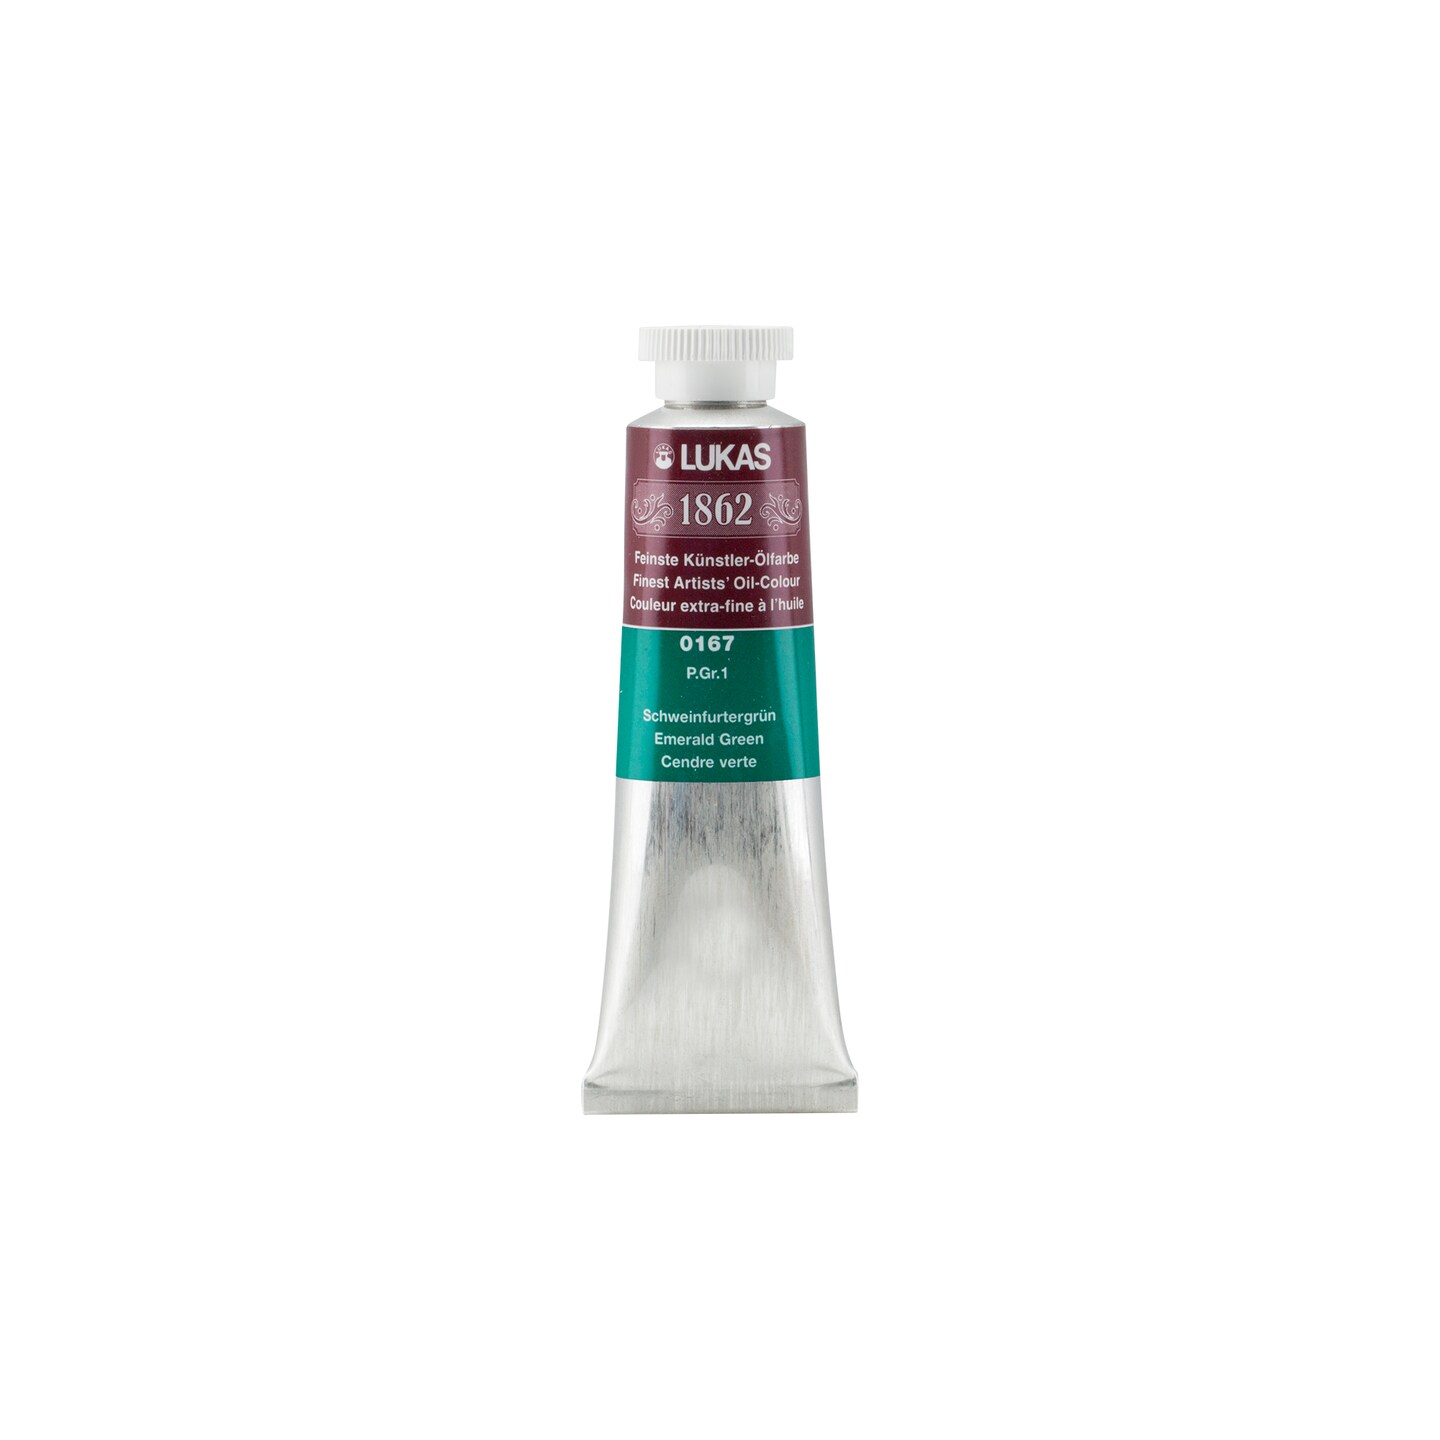 LUKAS 1862 Professional Artist Oil Paint - Emerald Green, 37 mL - Outstanding Lightfastness, Non-Yellowing, with Beeswax for Smooth, Buttery Texture, Consistent Hue, Ideal for Professional Artists